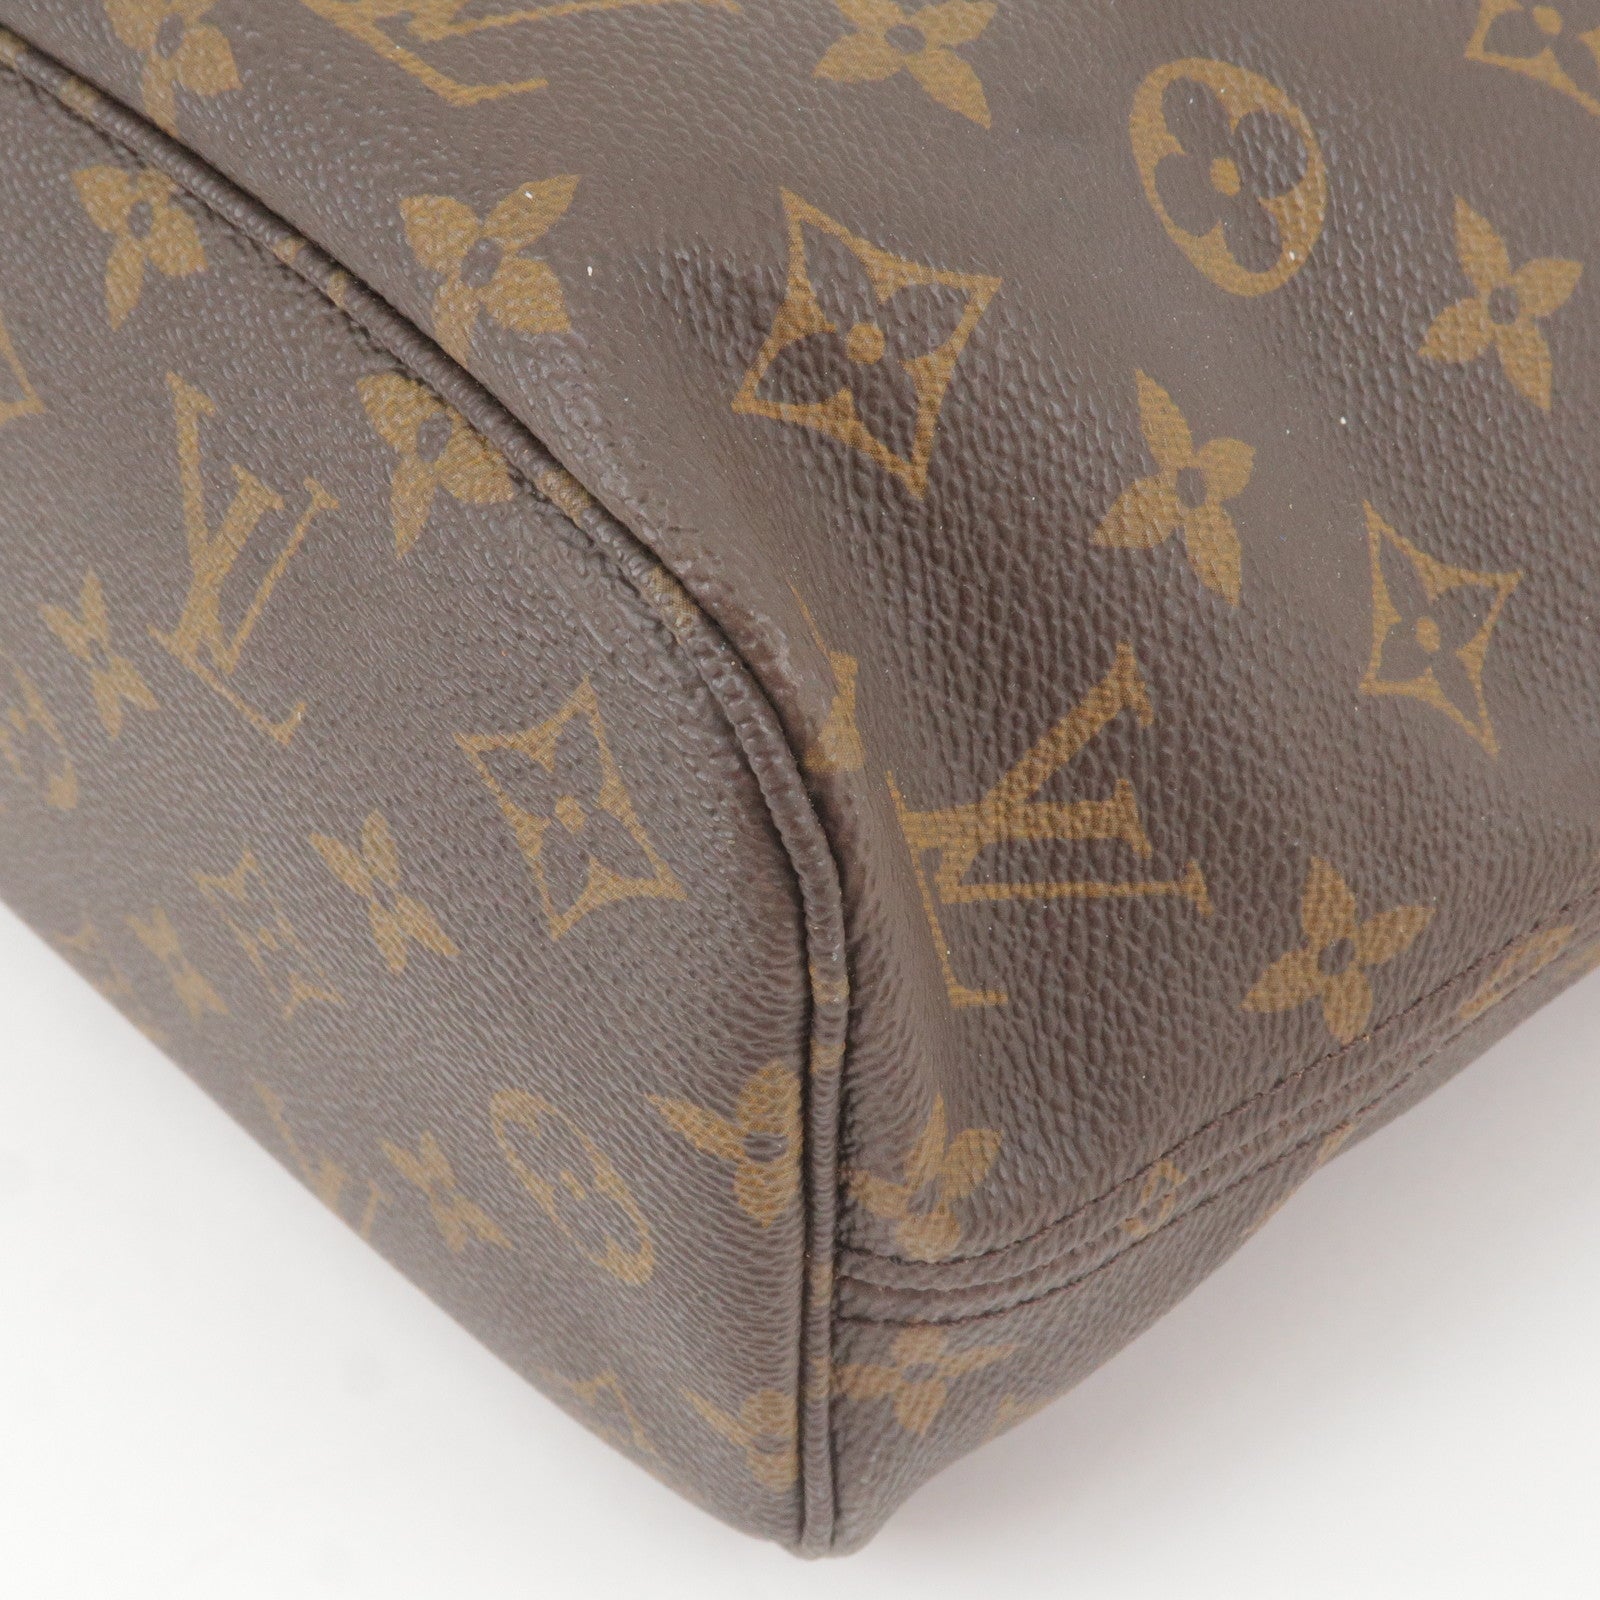 Buy [Used] LOUIS VUITTON Neverfull PM Tote Bag Monogram M40155 from Japan -  Buy authentic Plus exclusive items from Japan